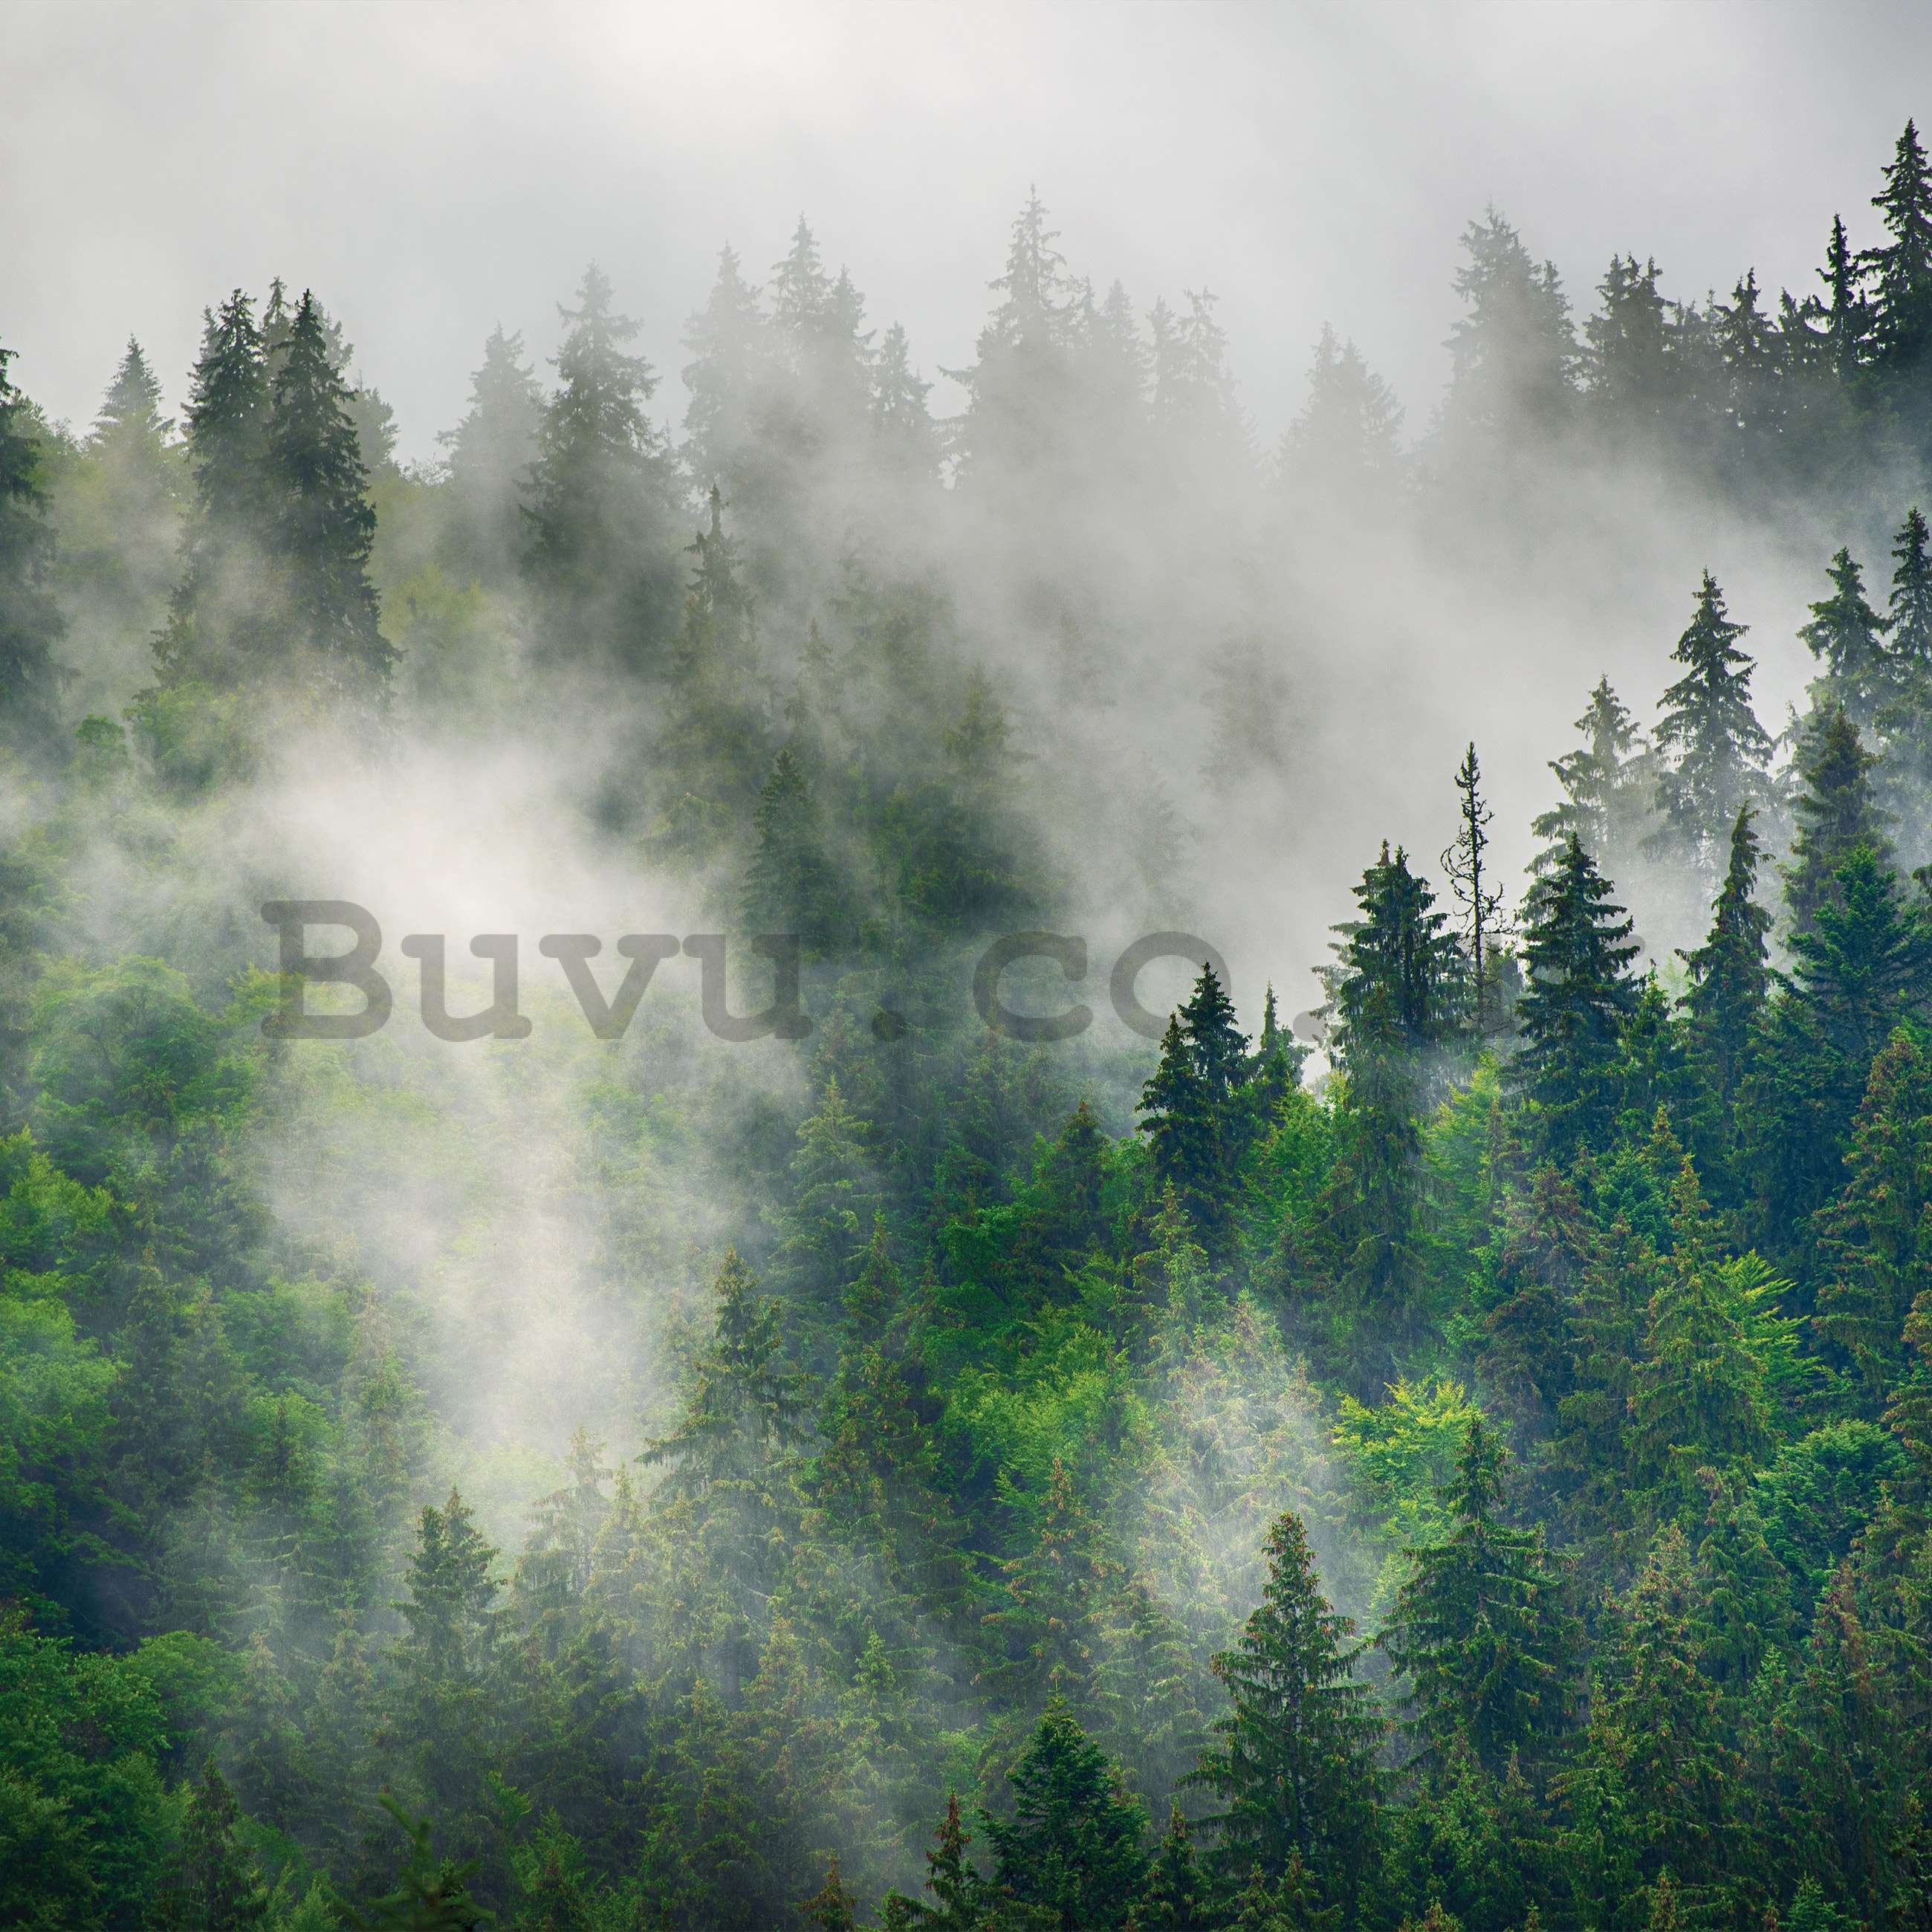 Wall mural vlies: Fog over the forest (5) - 368x254 cm